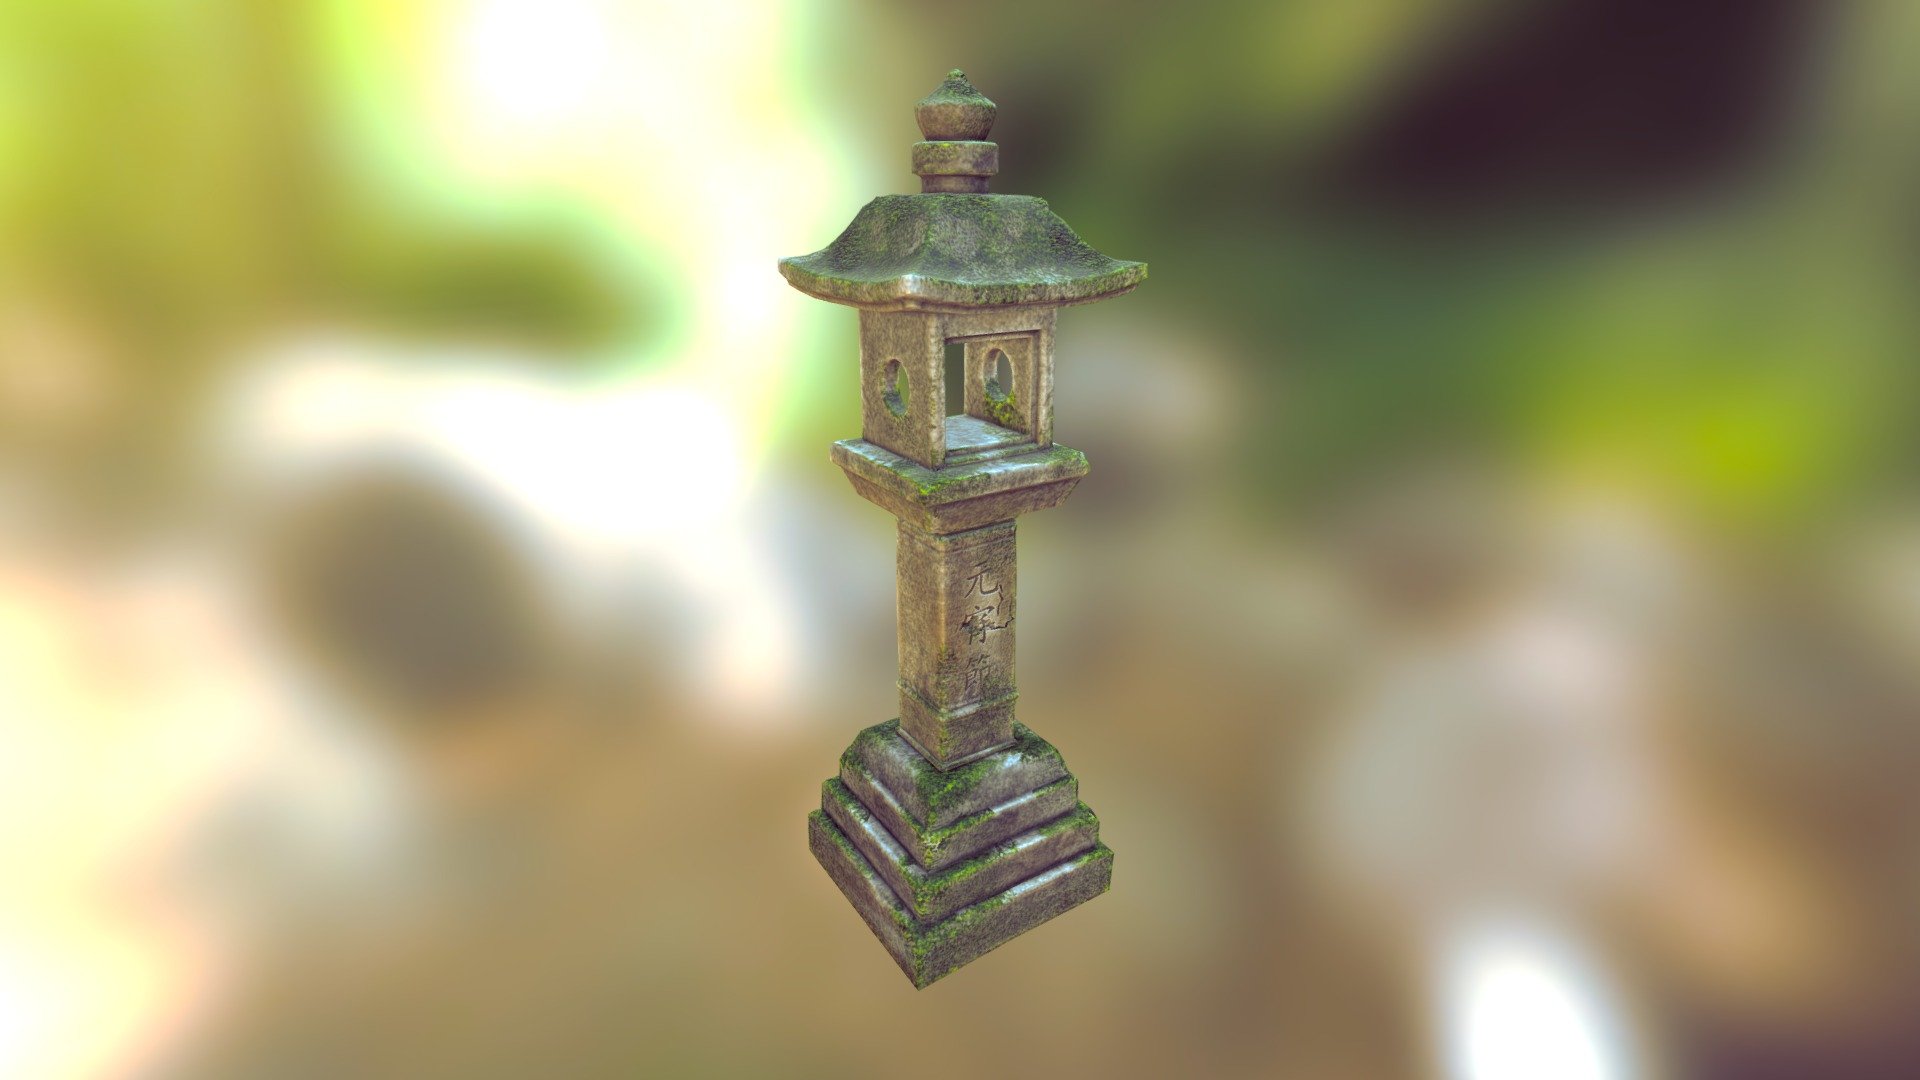 Shrine Lantern.
clean and simple topology. Made using 3Dcoat 3d model